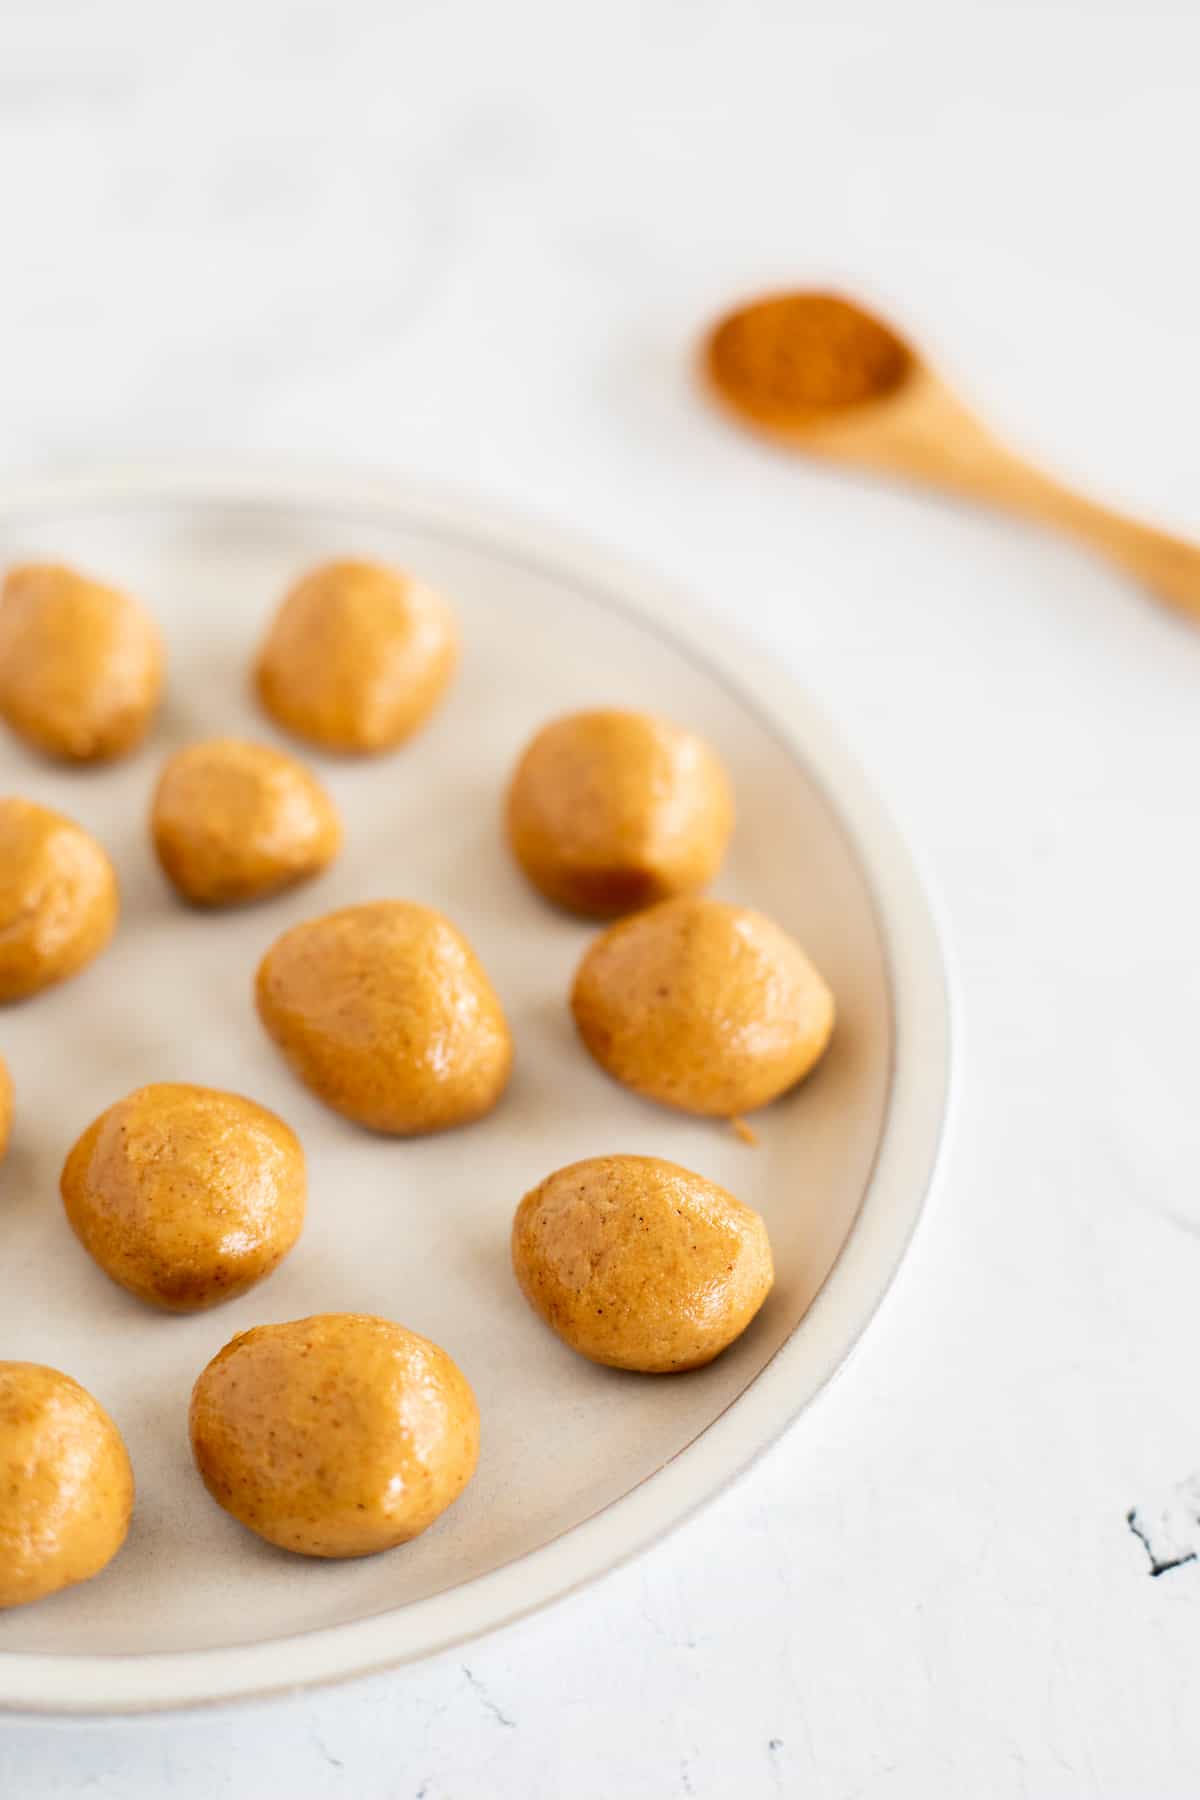 balls of sweetened peanut butter filling on a white plate.